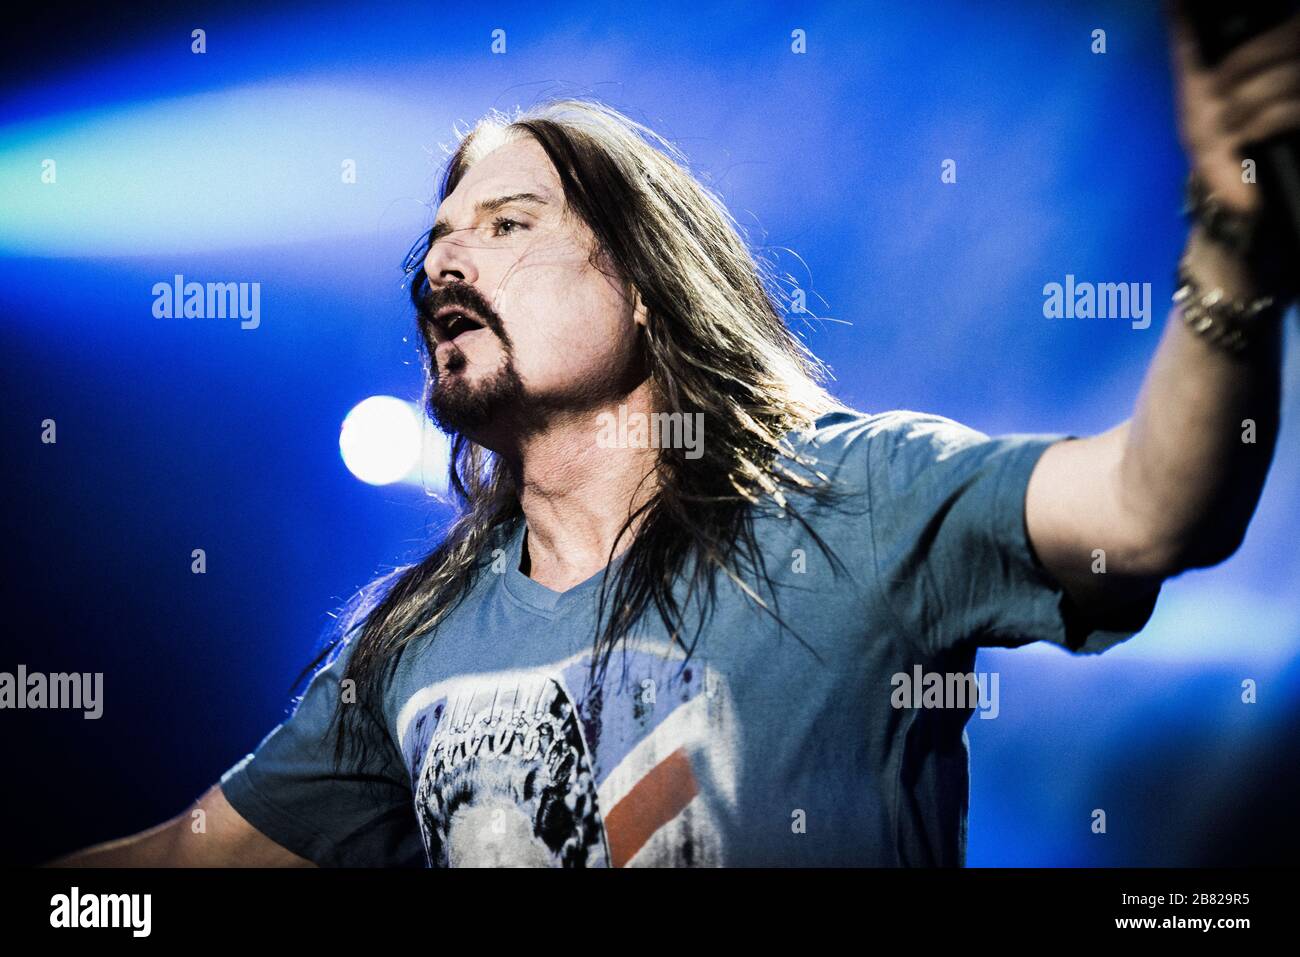 Copenhagen Denmark th February 14 The American Progressive Metal Band Dream Theater Performs A Live Concert At Falconer Salen In Frederiksberg Copenhagen Here Vocalist James Labrie Is Seen Live On Stage Photo